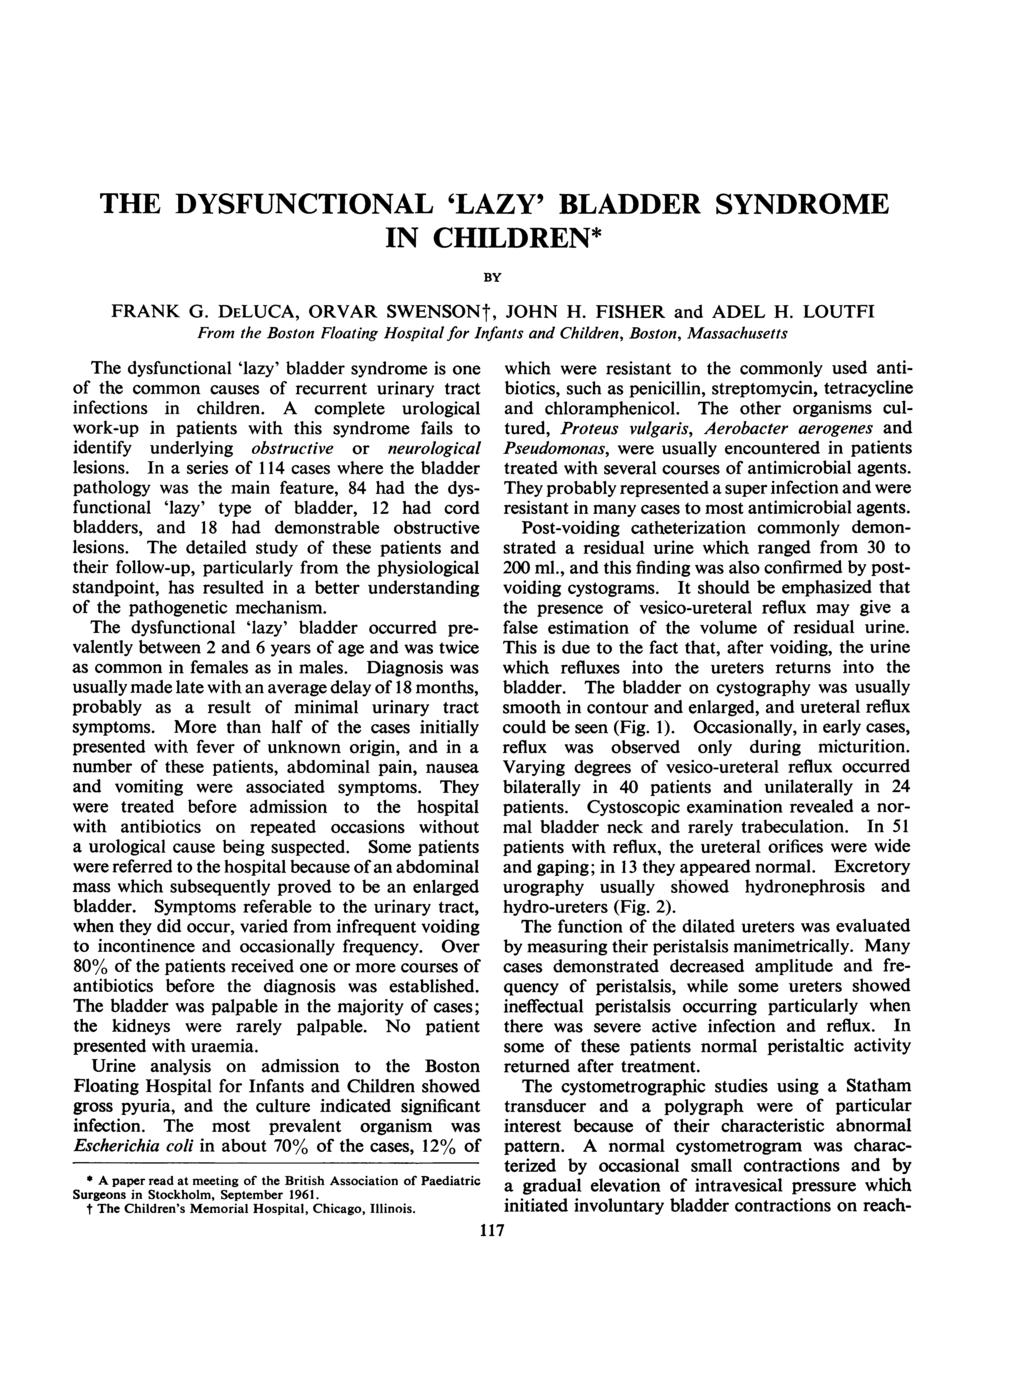 THE DYSFUNCTIONAL 'LAZY' BLADDER SYNDROME IN CHILDREN* BY FRANK G. DELUCA, ORVAR SWENSONt, JOHN H. FISHER and ADEL H.